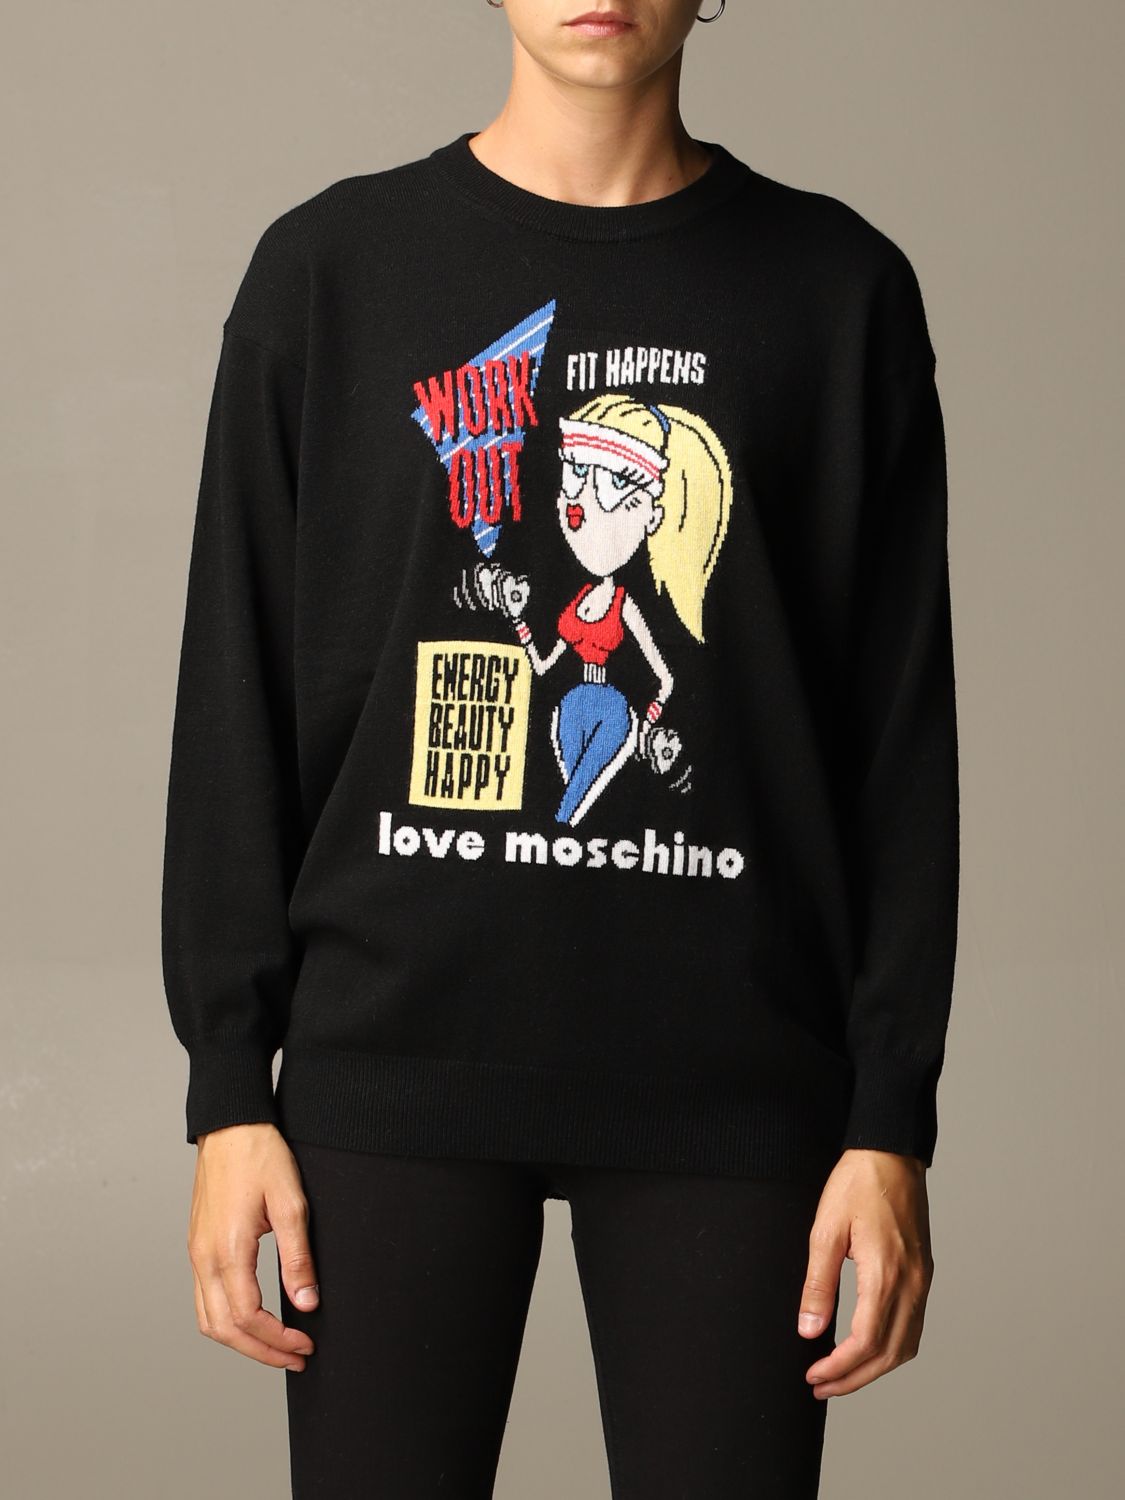 love moschino outlet usa